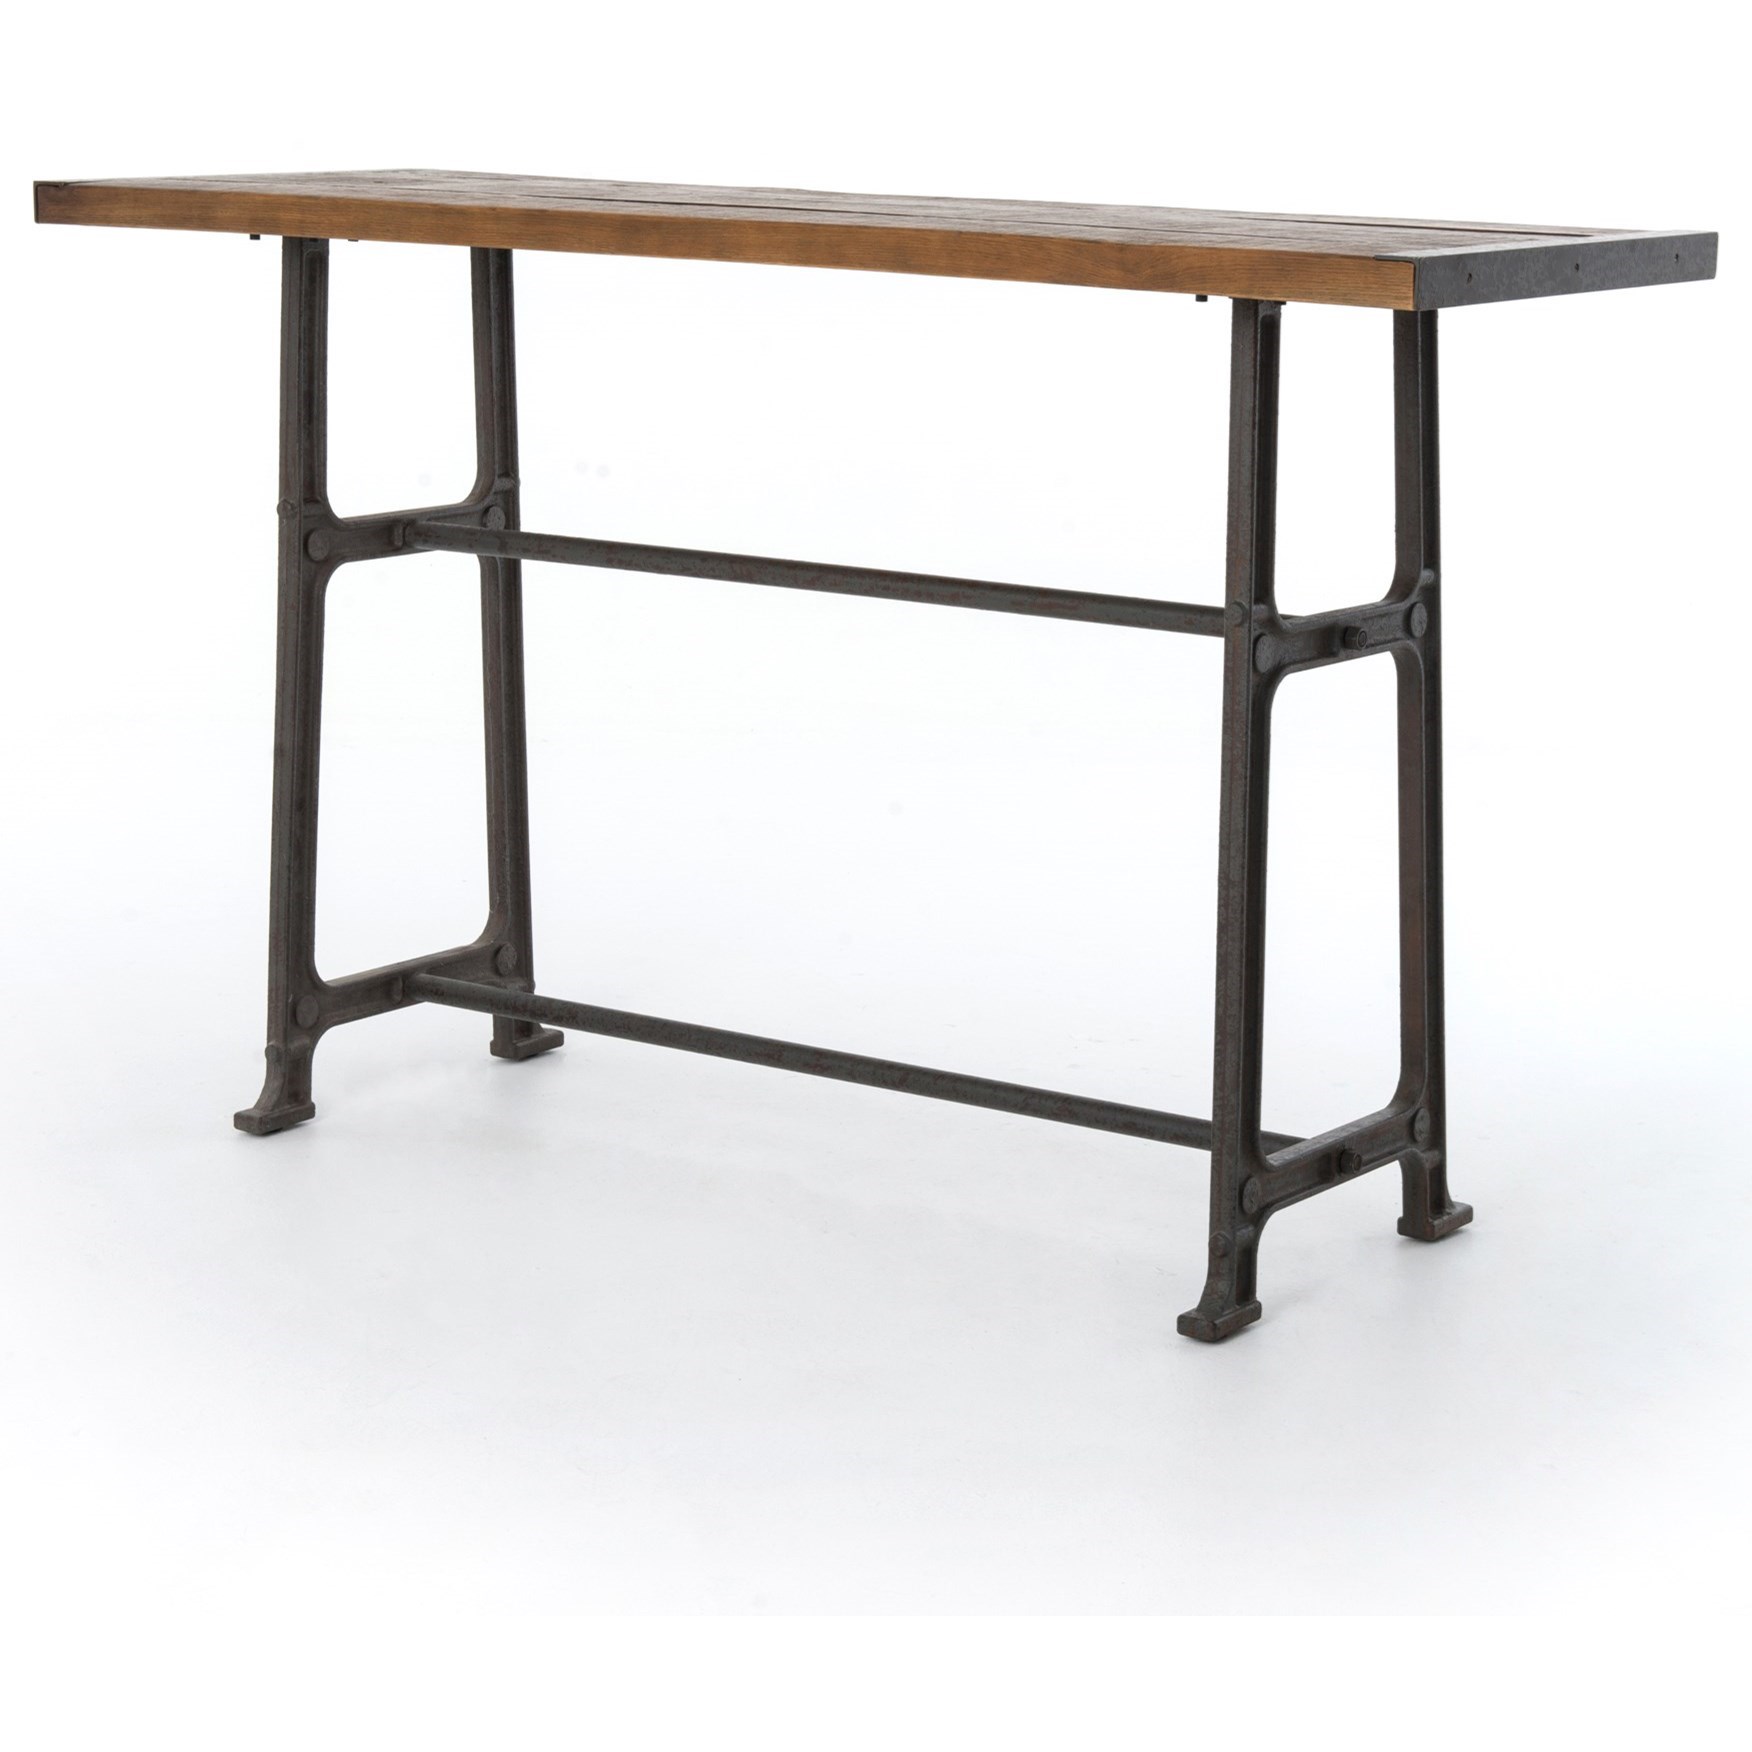 Alistair Pub Table with Distressed Top